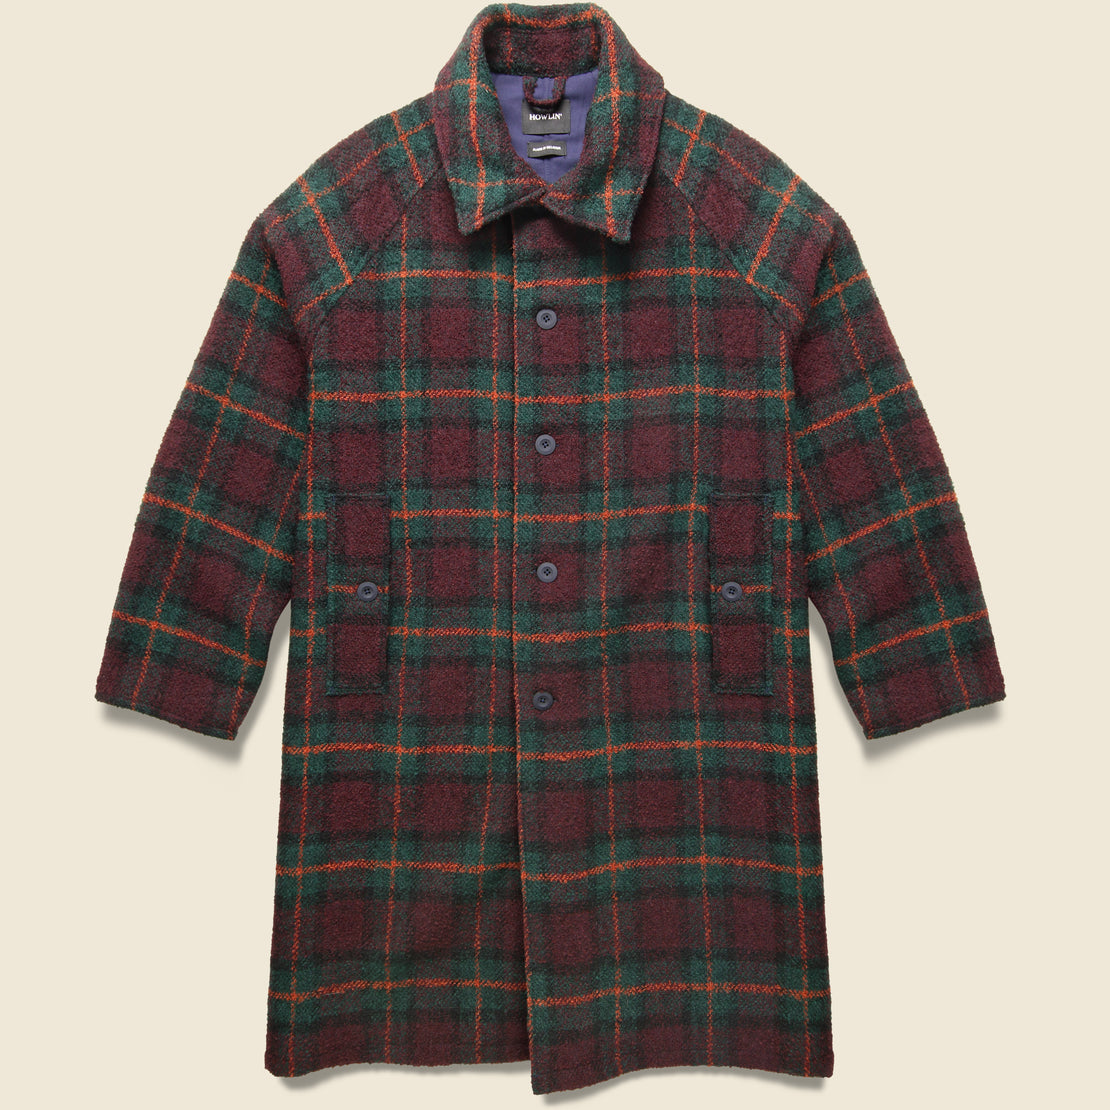 Howlin Lost in Space Jacket - Red Wool Check